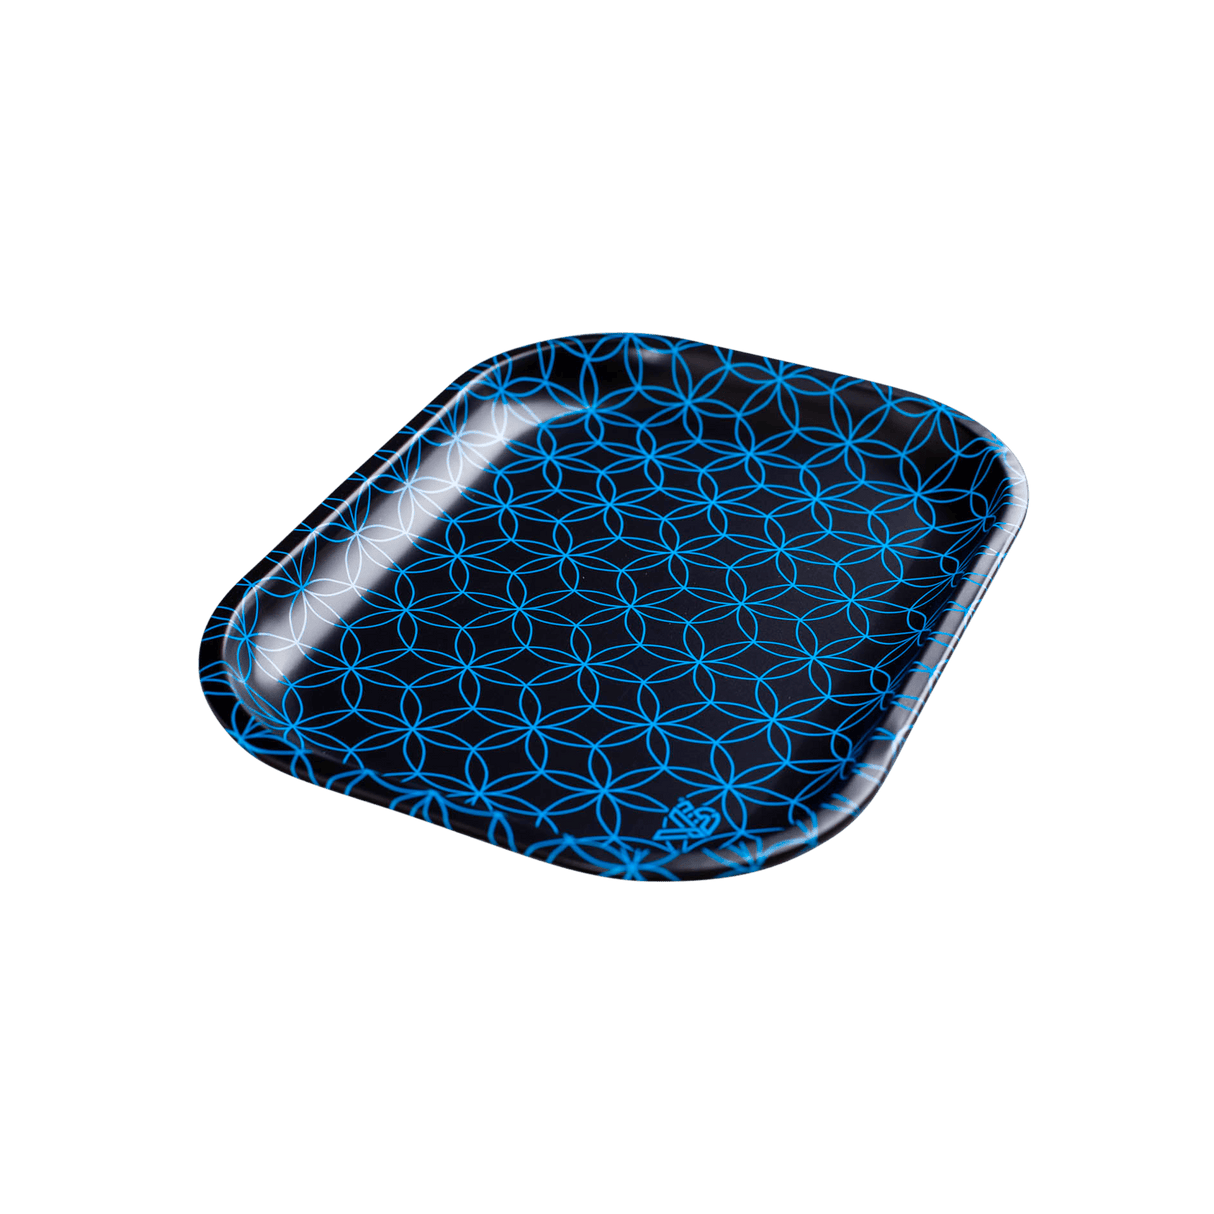 V Syndicate Geo Rings Metal Rollin' Tray in Blue with Psychedelic Pattern, Compact Design